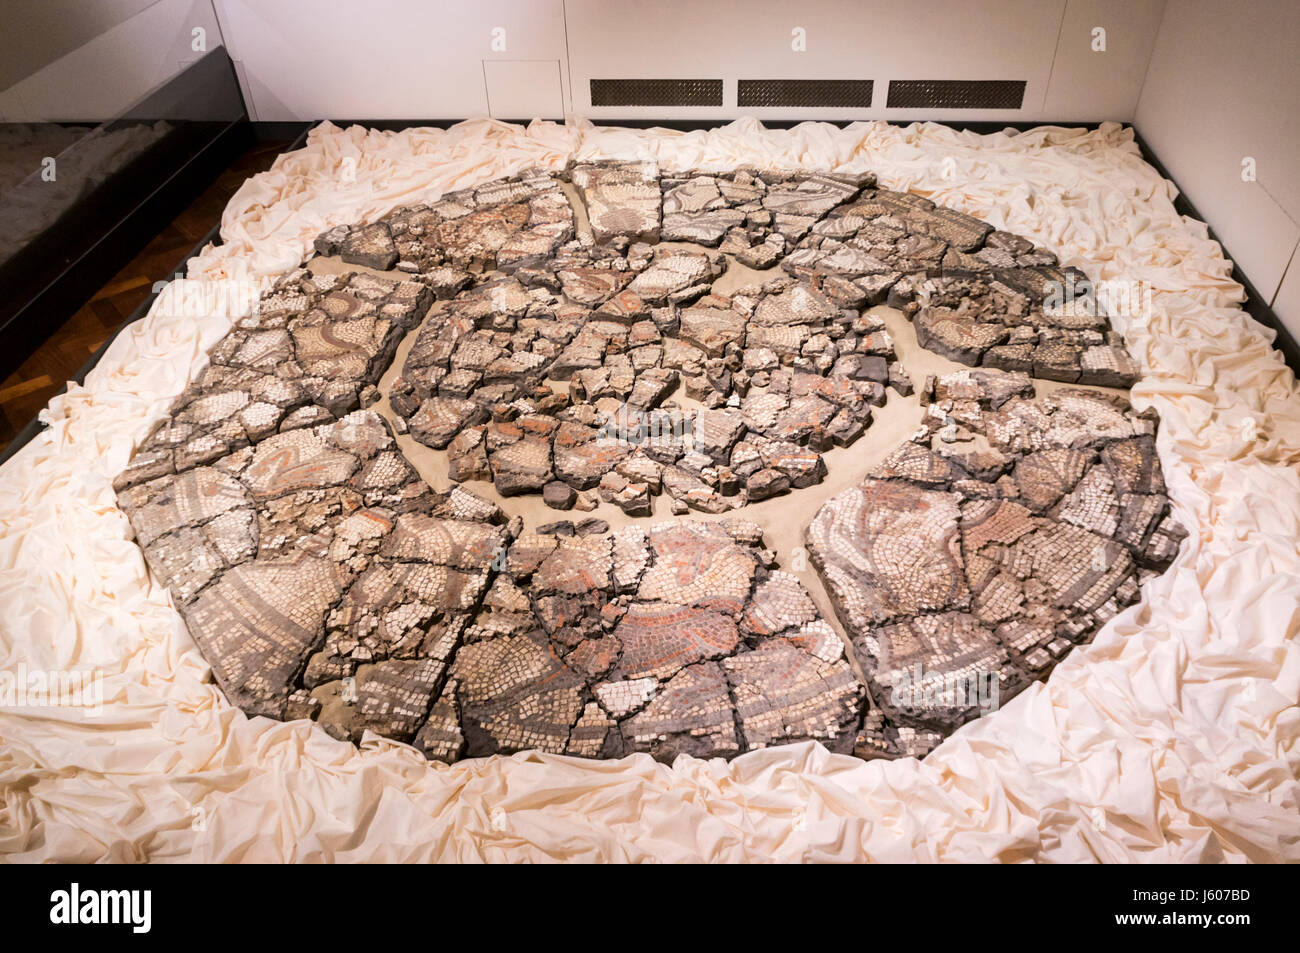 Mosaic floor from Roman Villa discovered at Newton St Loe in 1837. SEE DETAILS IN DESCRIPTION. Stock Photo